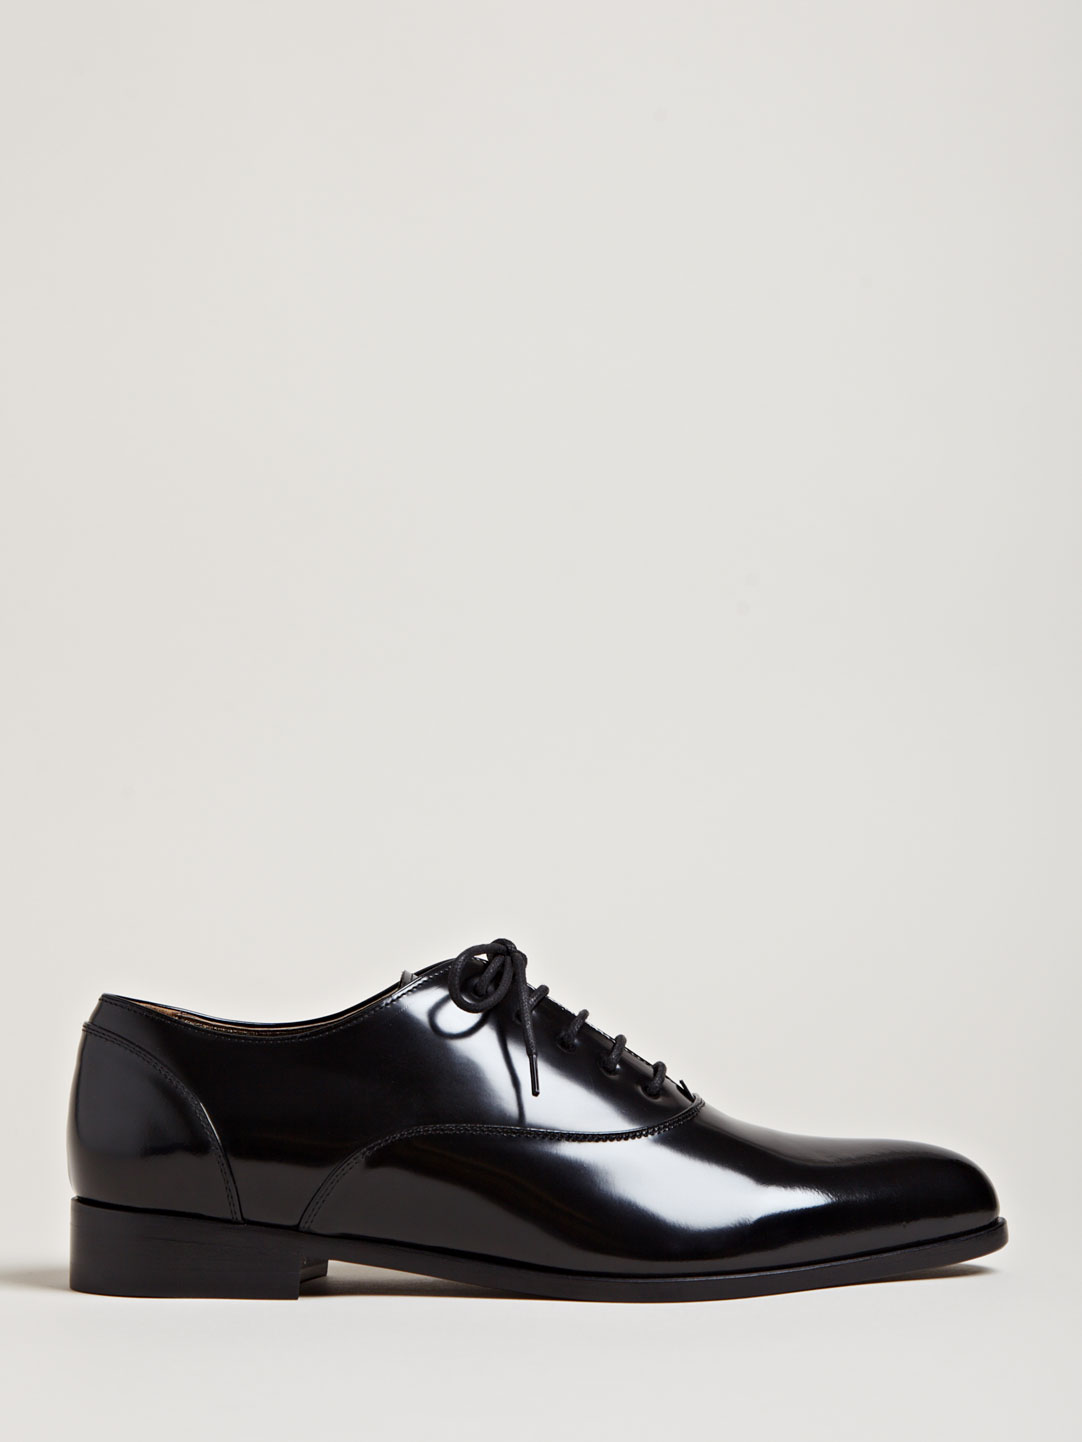 Lyst - Lanvin Womens Pointed Richelieu Shoes in Black